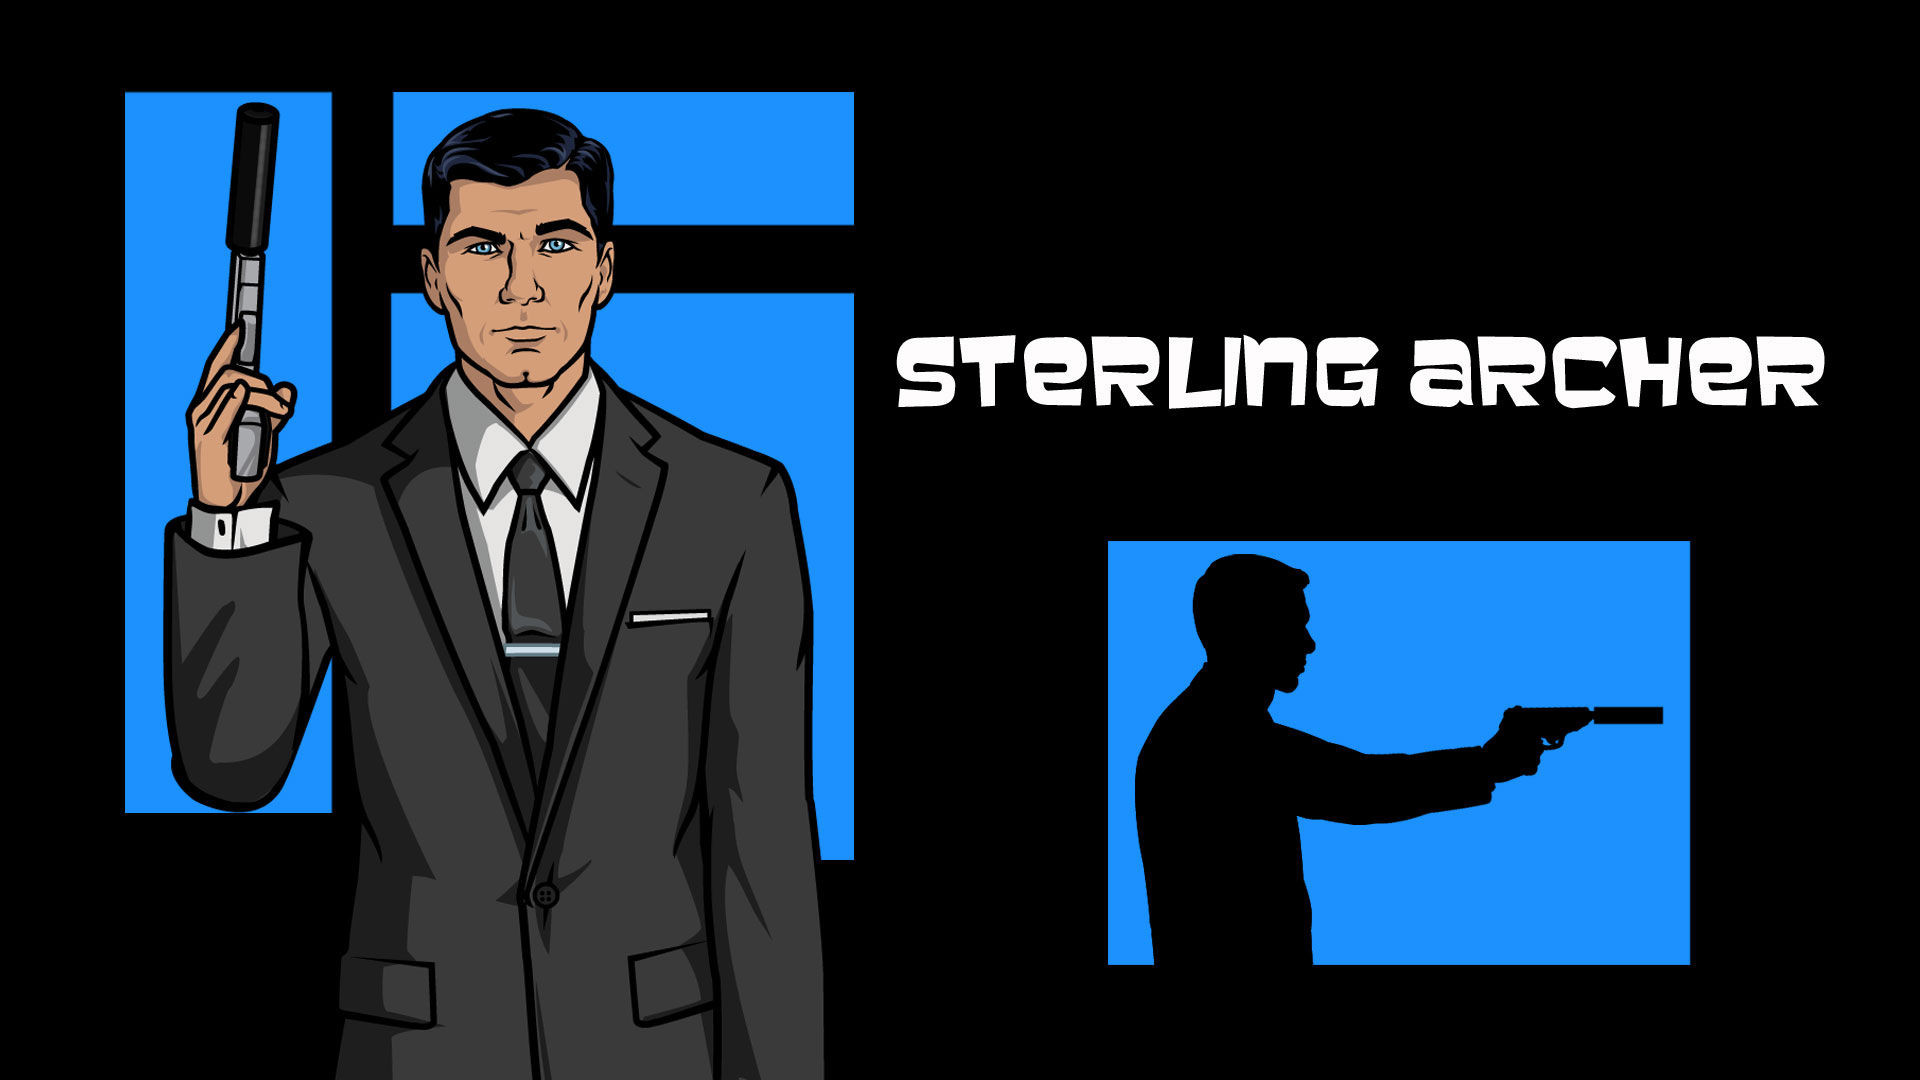 1920x1080 Also like the look of the characters from the FX cartoon Archer. (His  character is a spy, so similar to what we'd be going for.